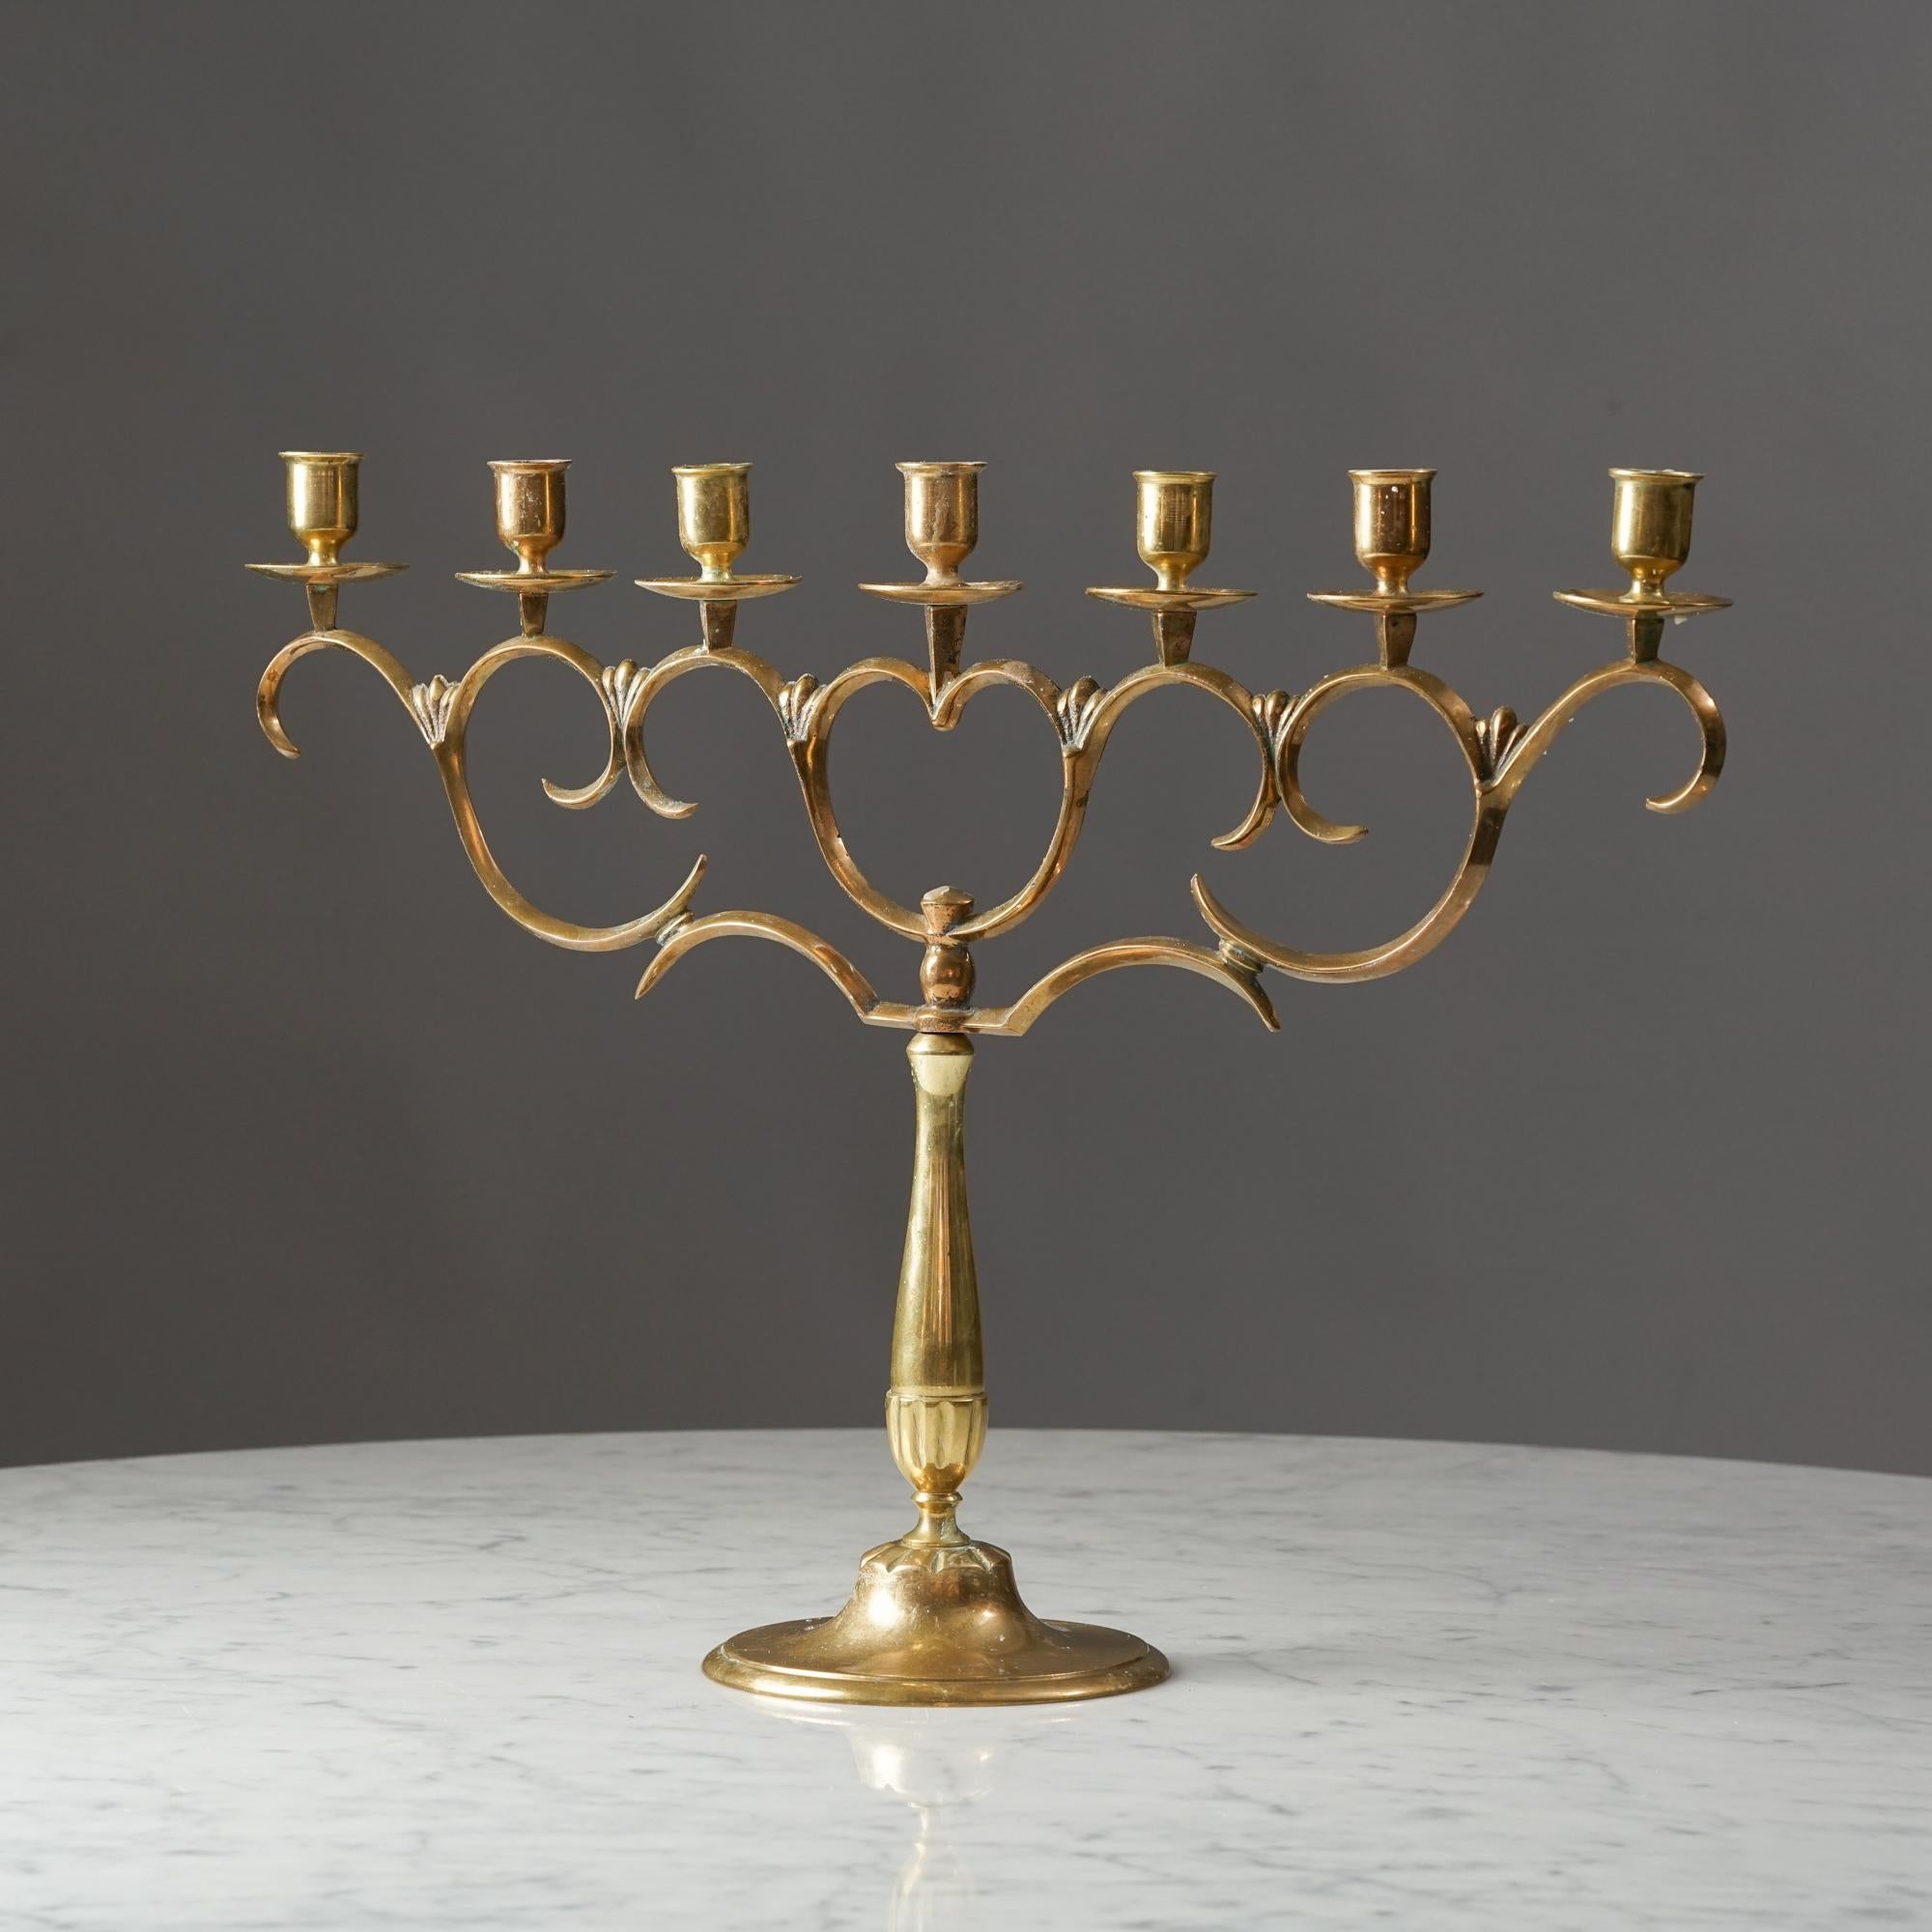 Brass candelabra by Paavo Tynell. Made in Finland by Taito in the 1920/1930s. This piece is a classic Paavo Tynell chandelier for Taito Oy, which was made in different sizes. 

Marked '162'. 

